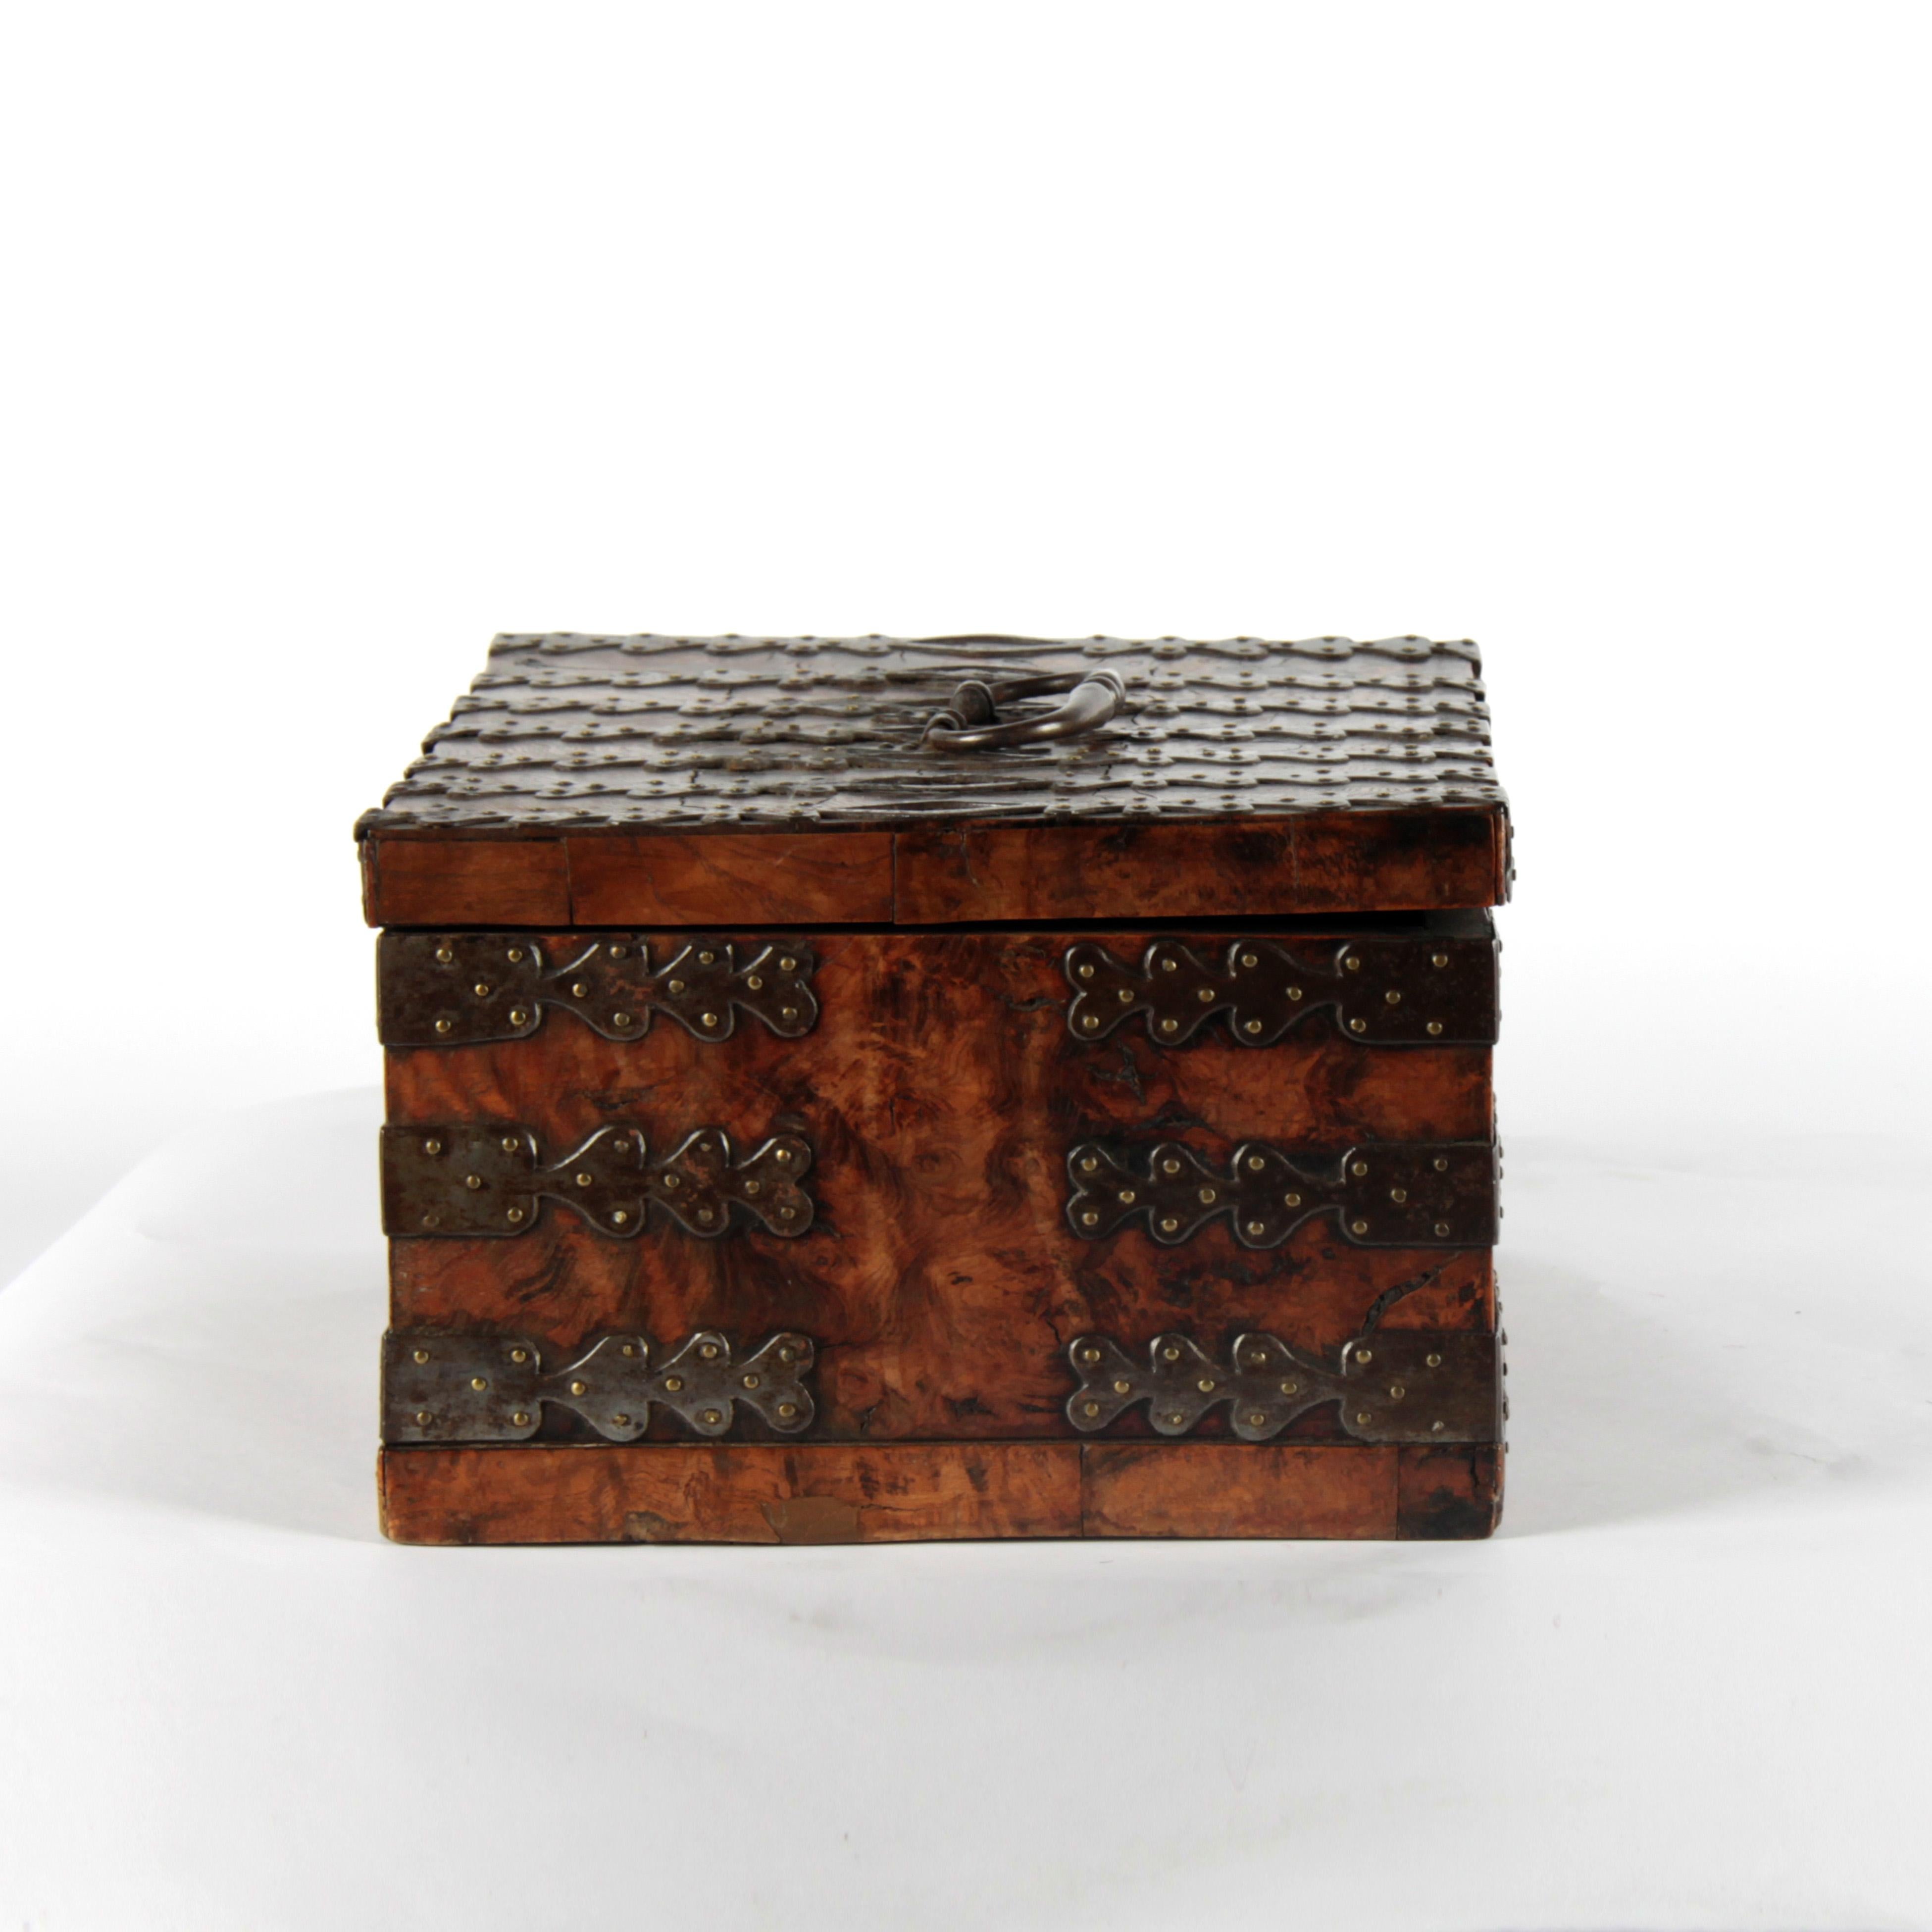 Sea captain's box with iron fittings
1680/1720
colonial.